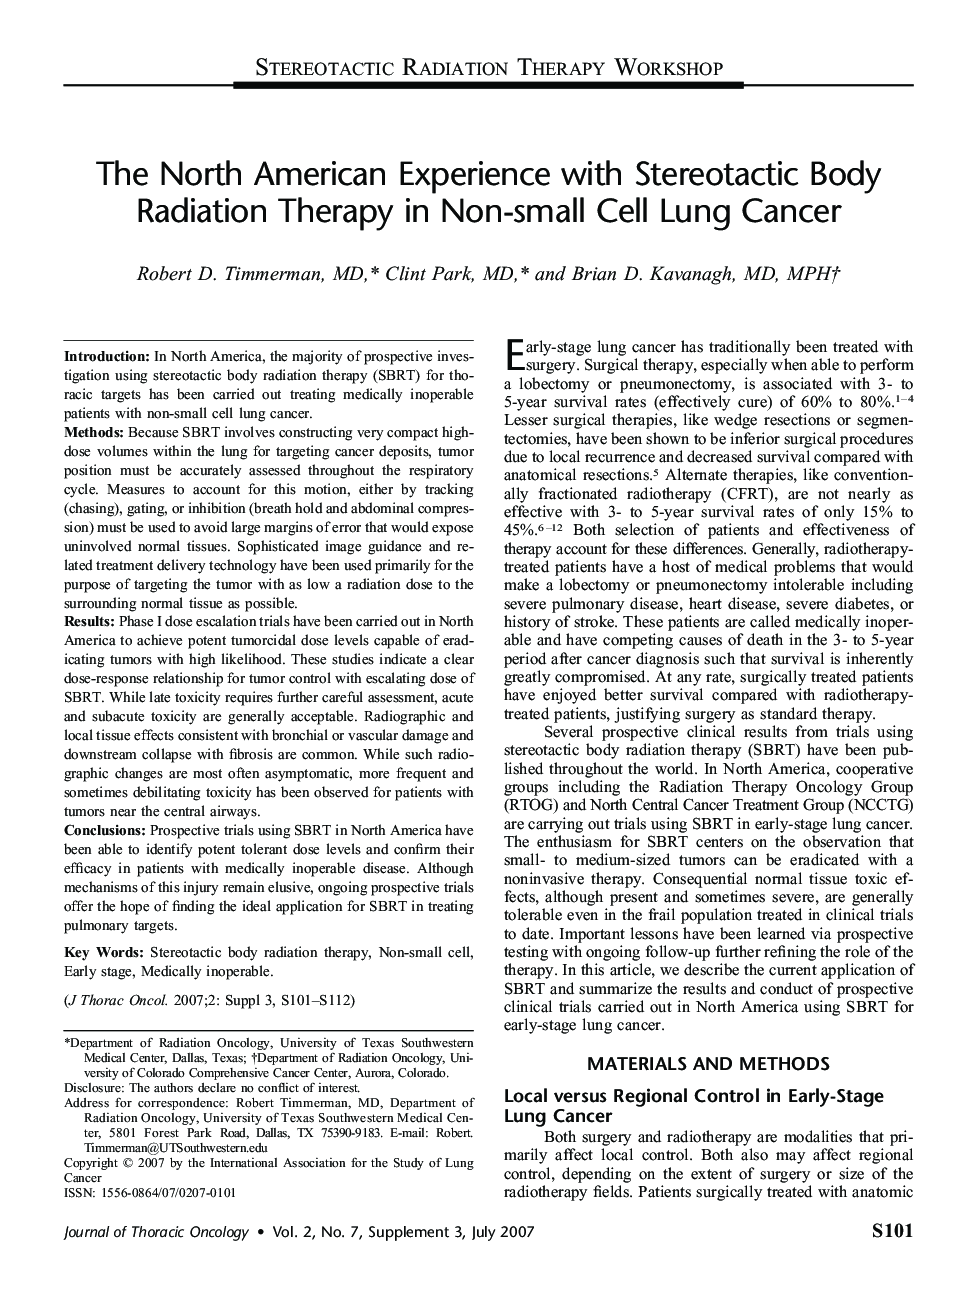 The North American Experience with Stereotactic Body Radiation Therapy in Non-small Cell Lung Cancer 